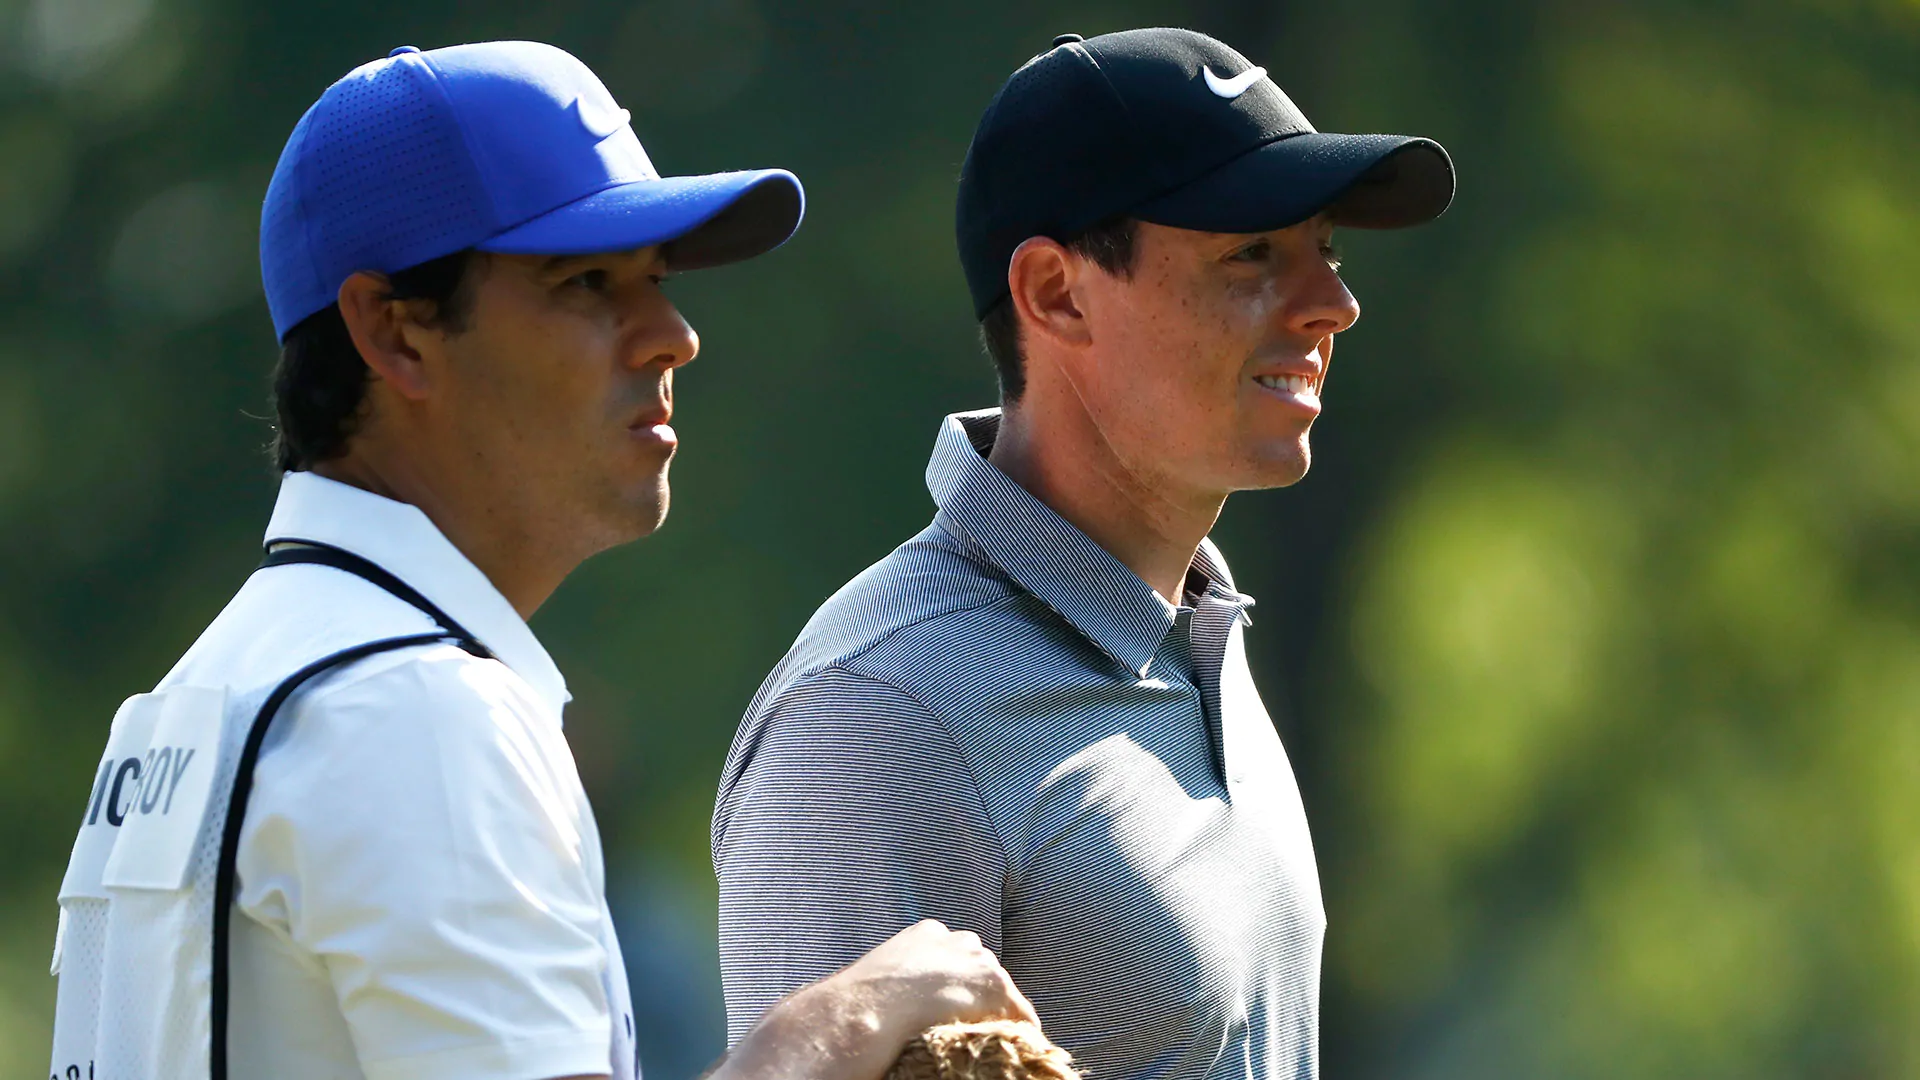 McIlroy calls first round with new caddie 'awesome' 5